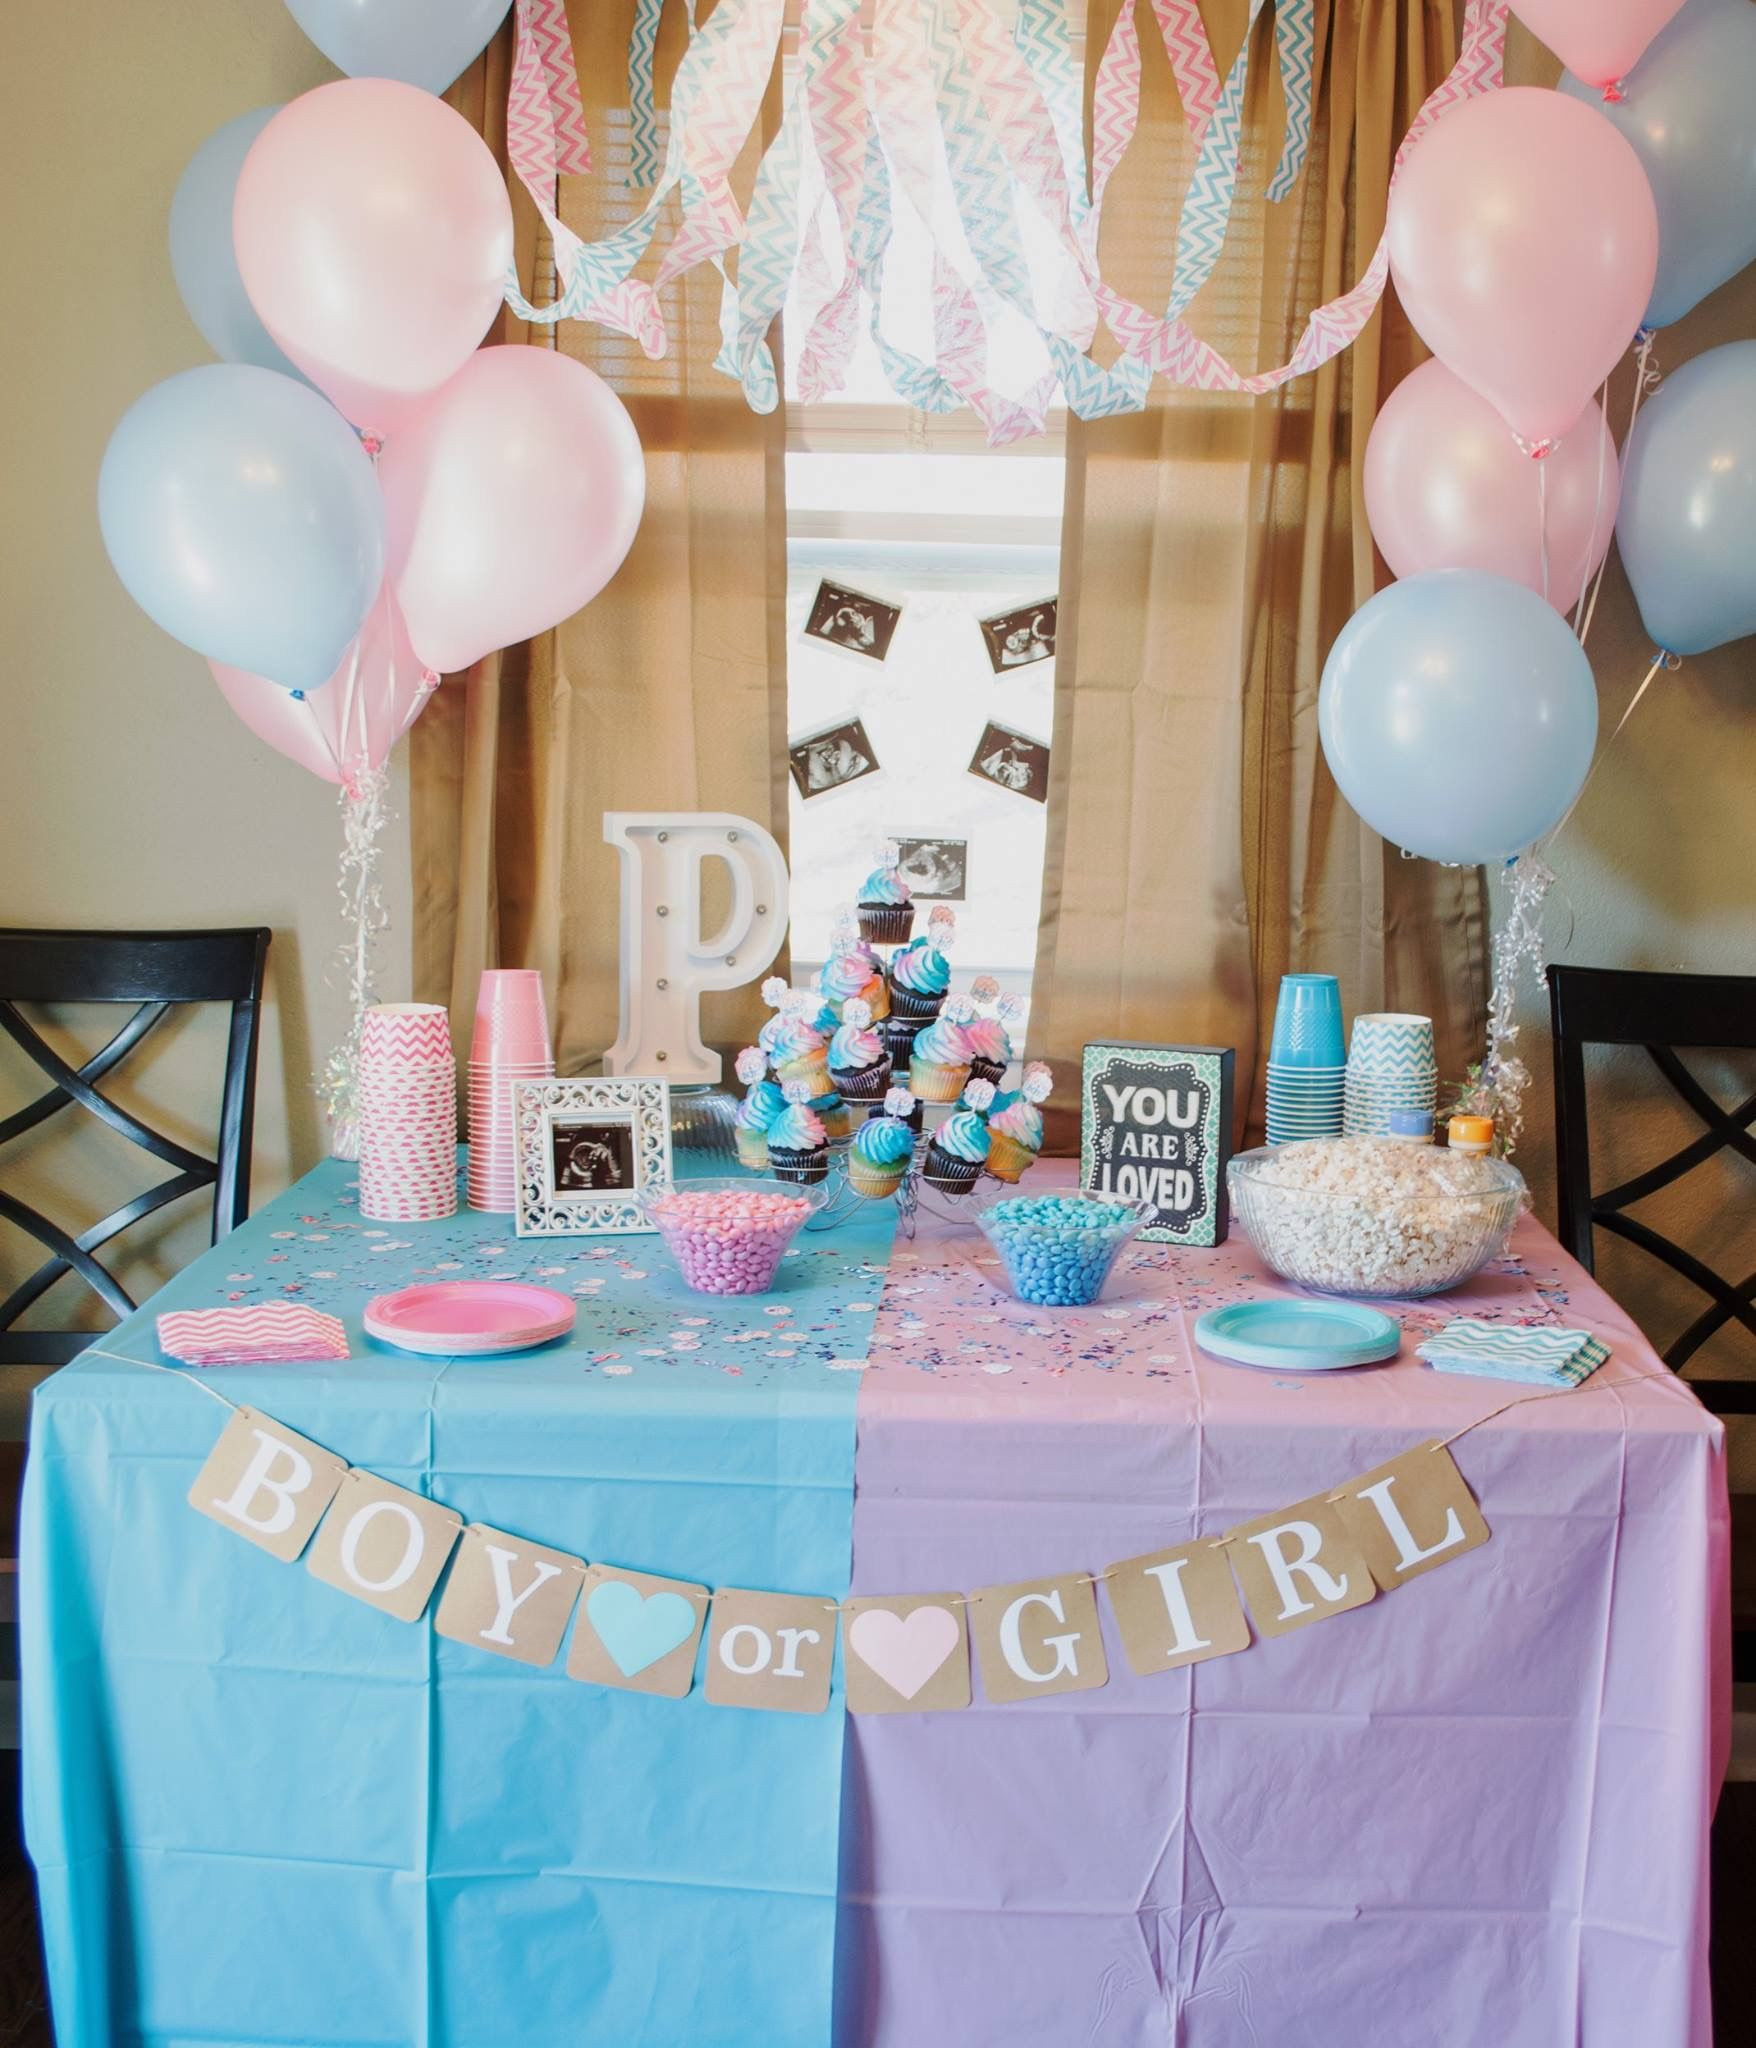 Reveal Gender Party Ideas
 Gender Reveal Party 45 mybabydoo